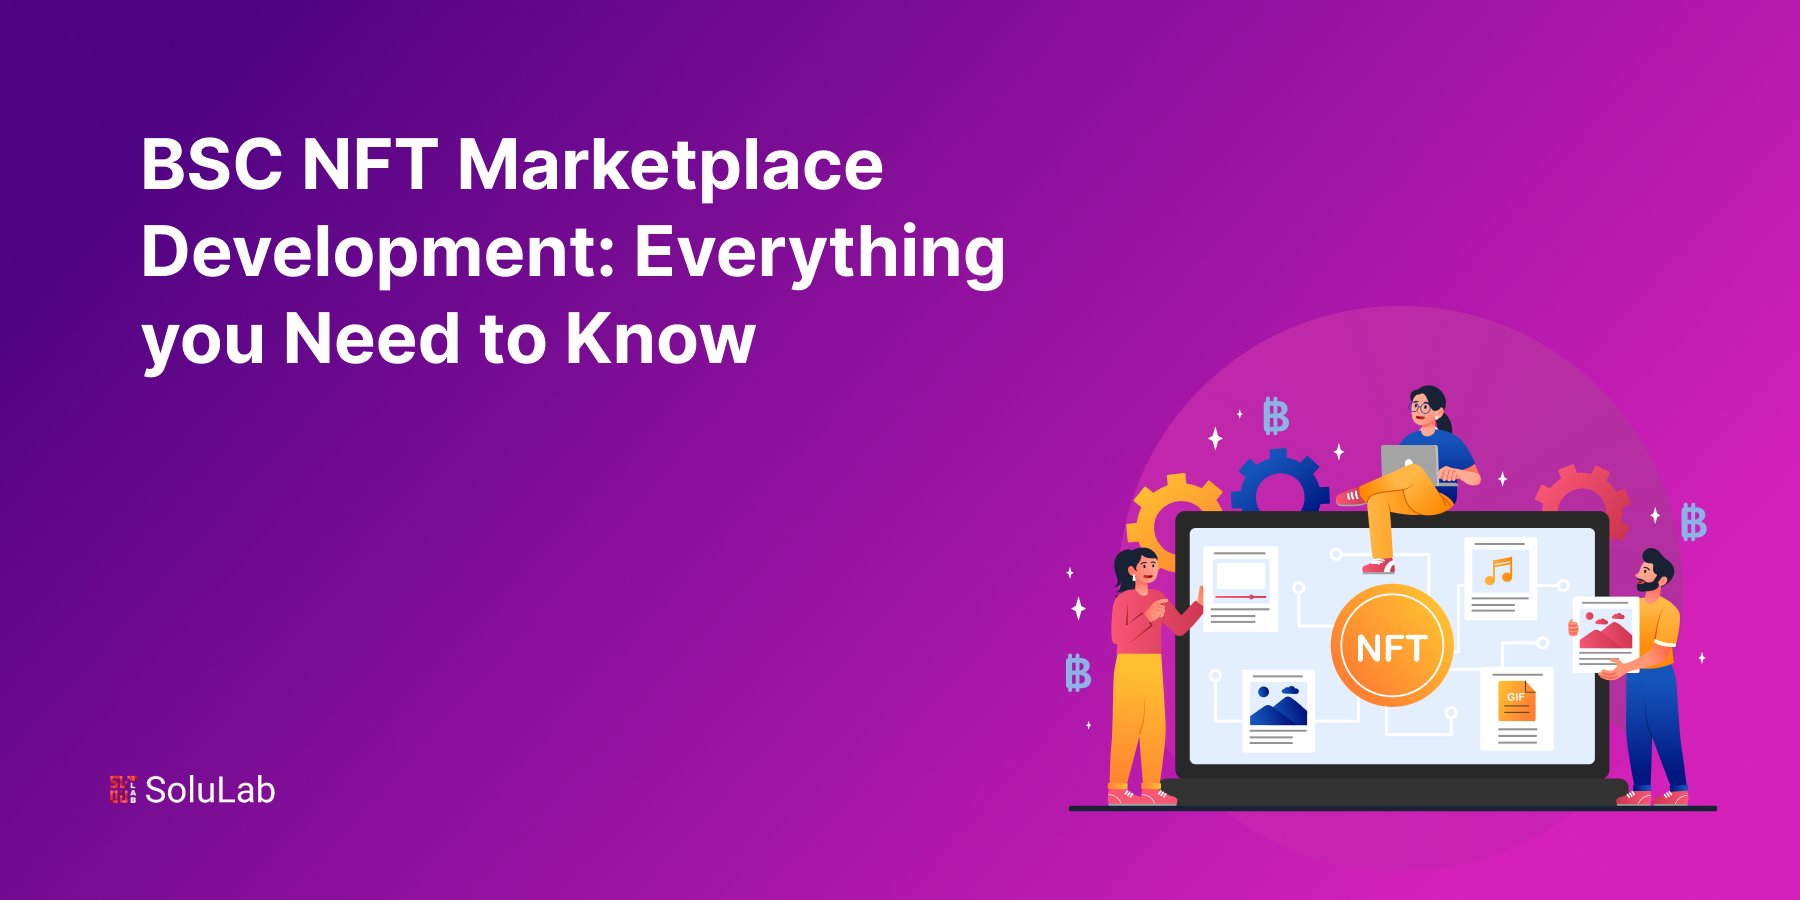 BSC NFT Marketplace Development: Everything you Need to Know